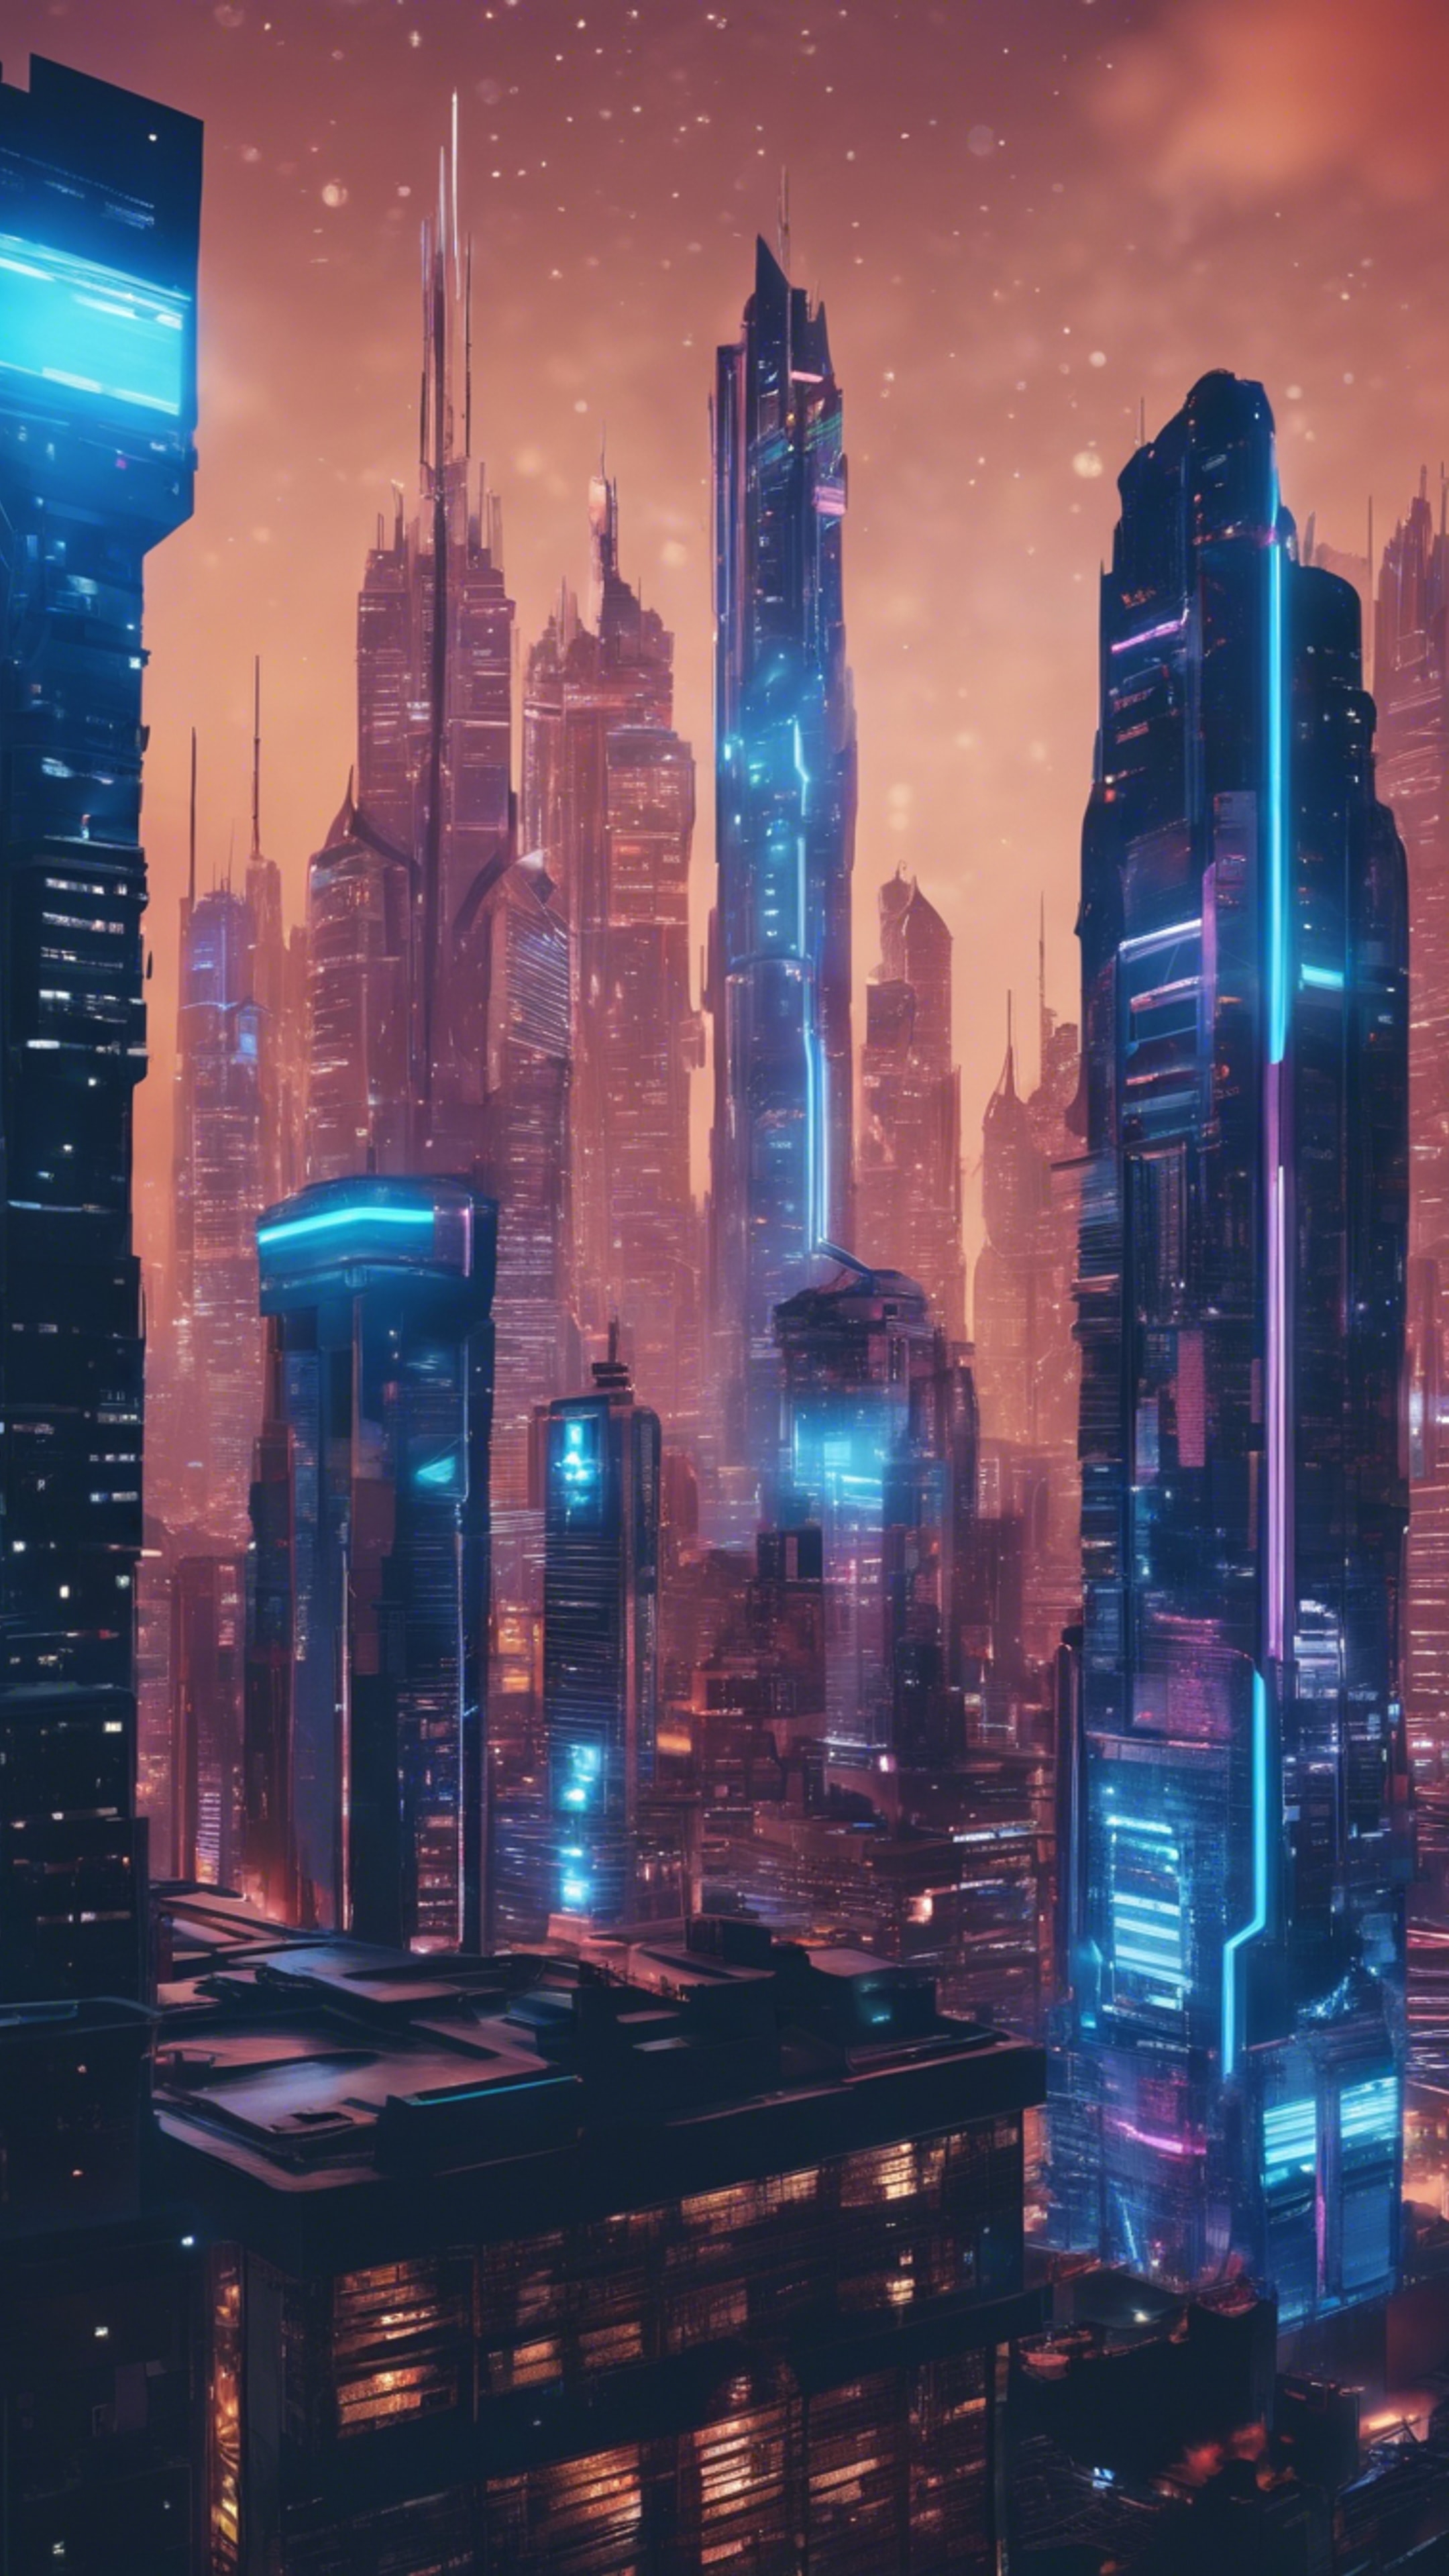 A futuristic city glowing with vibrant neon-blue lights and skyscrapers piercing the night sky. Ფონი[2f3a3bdee3e14a4e9359]